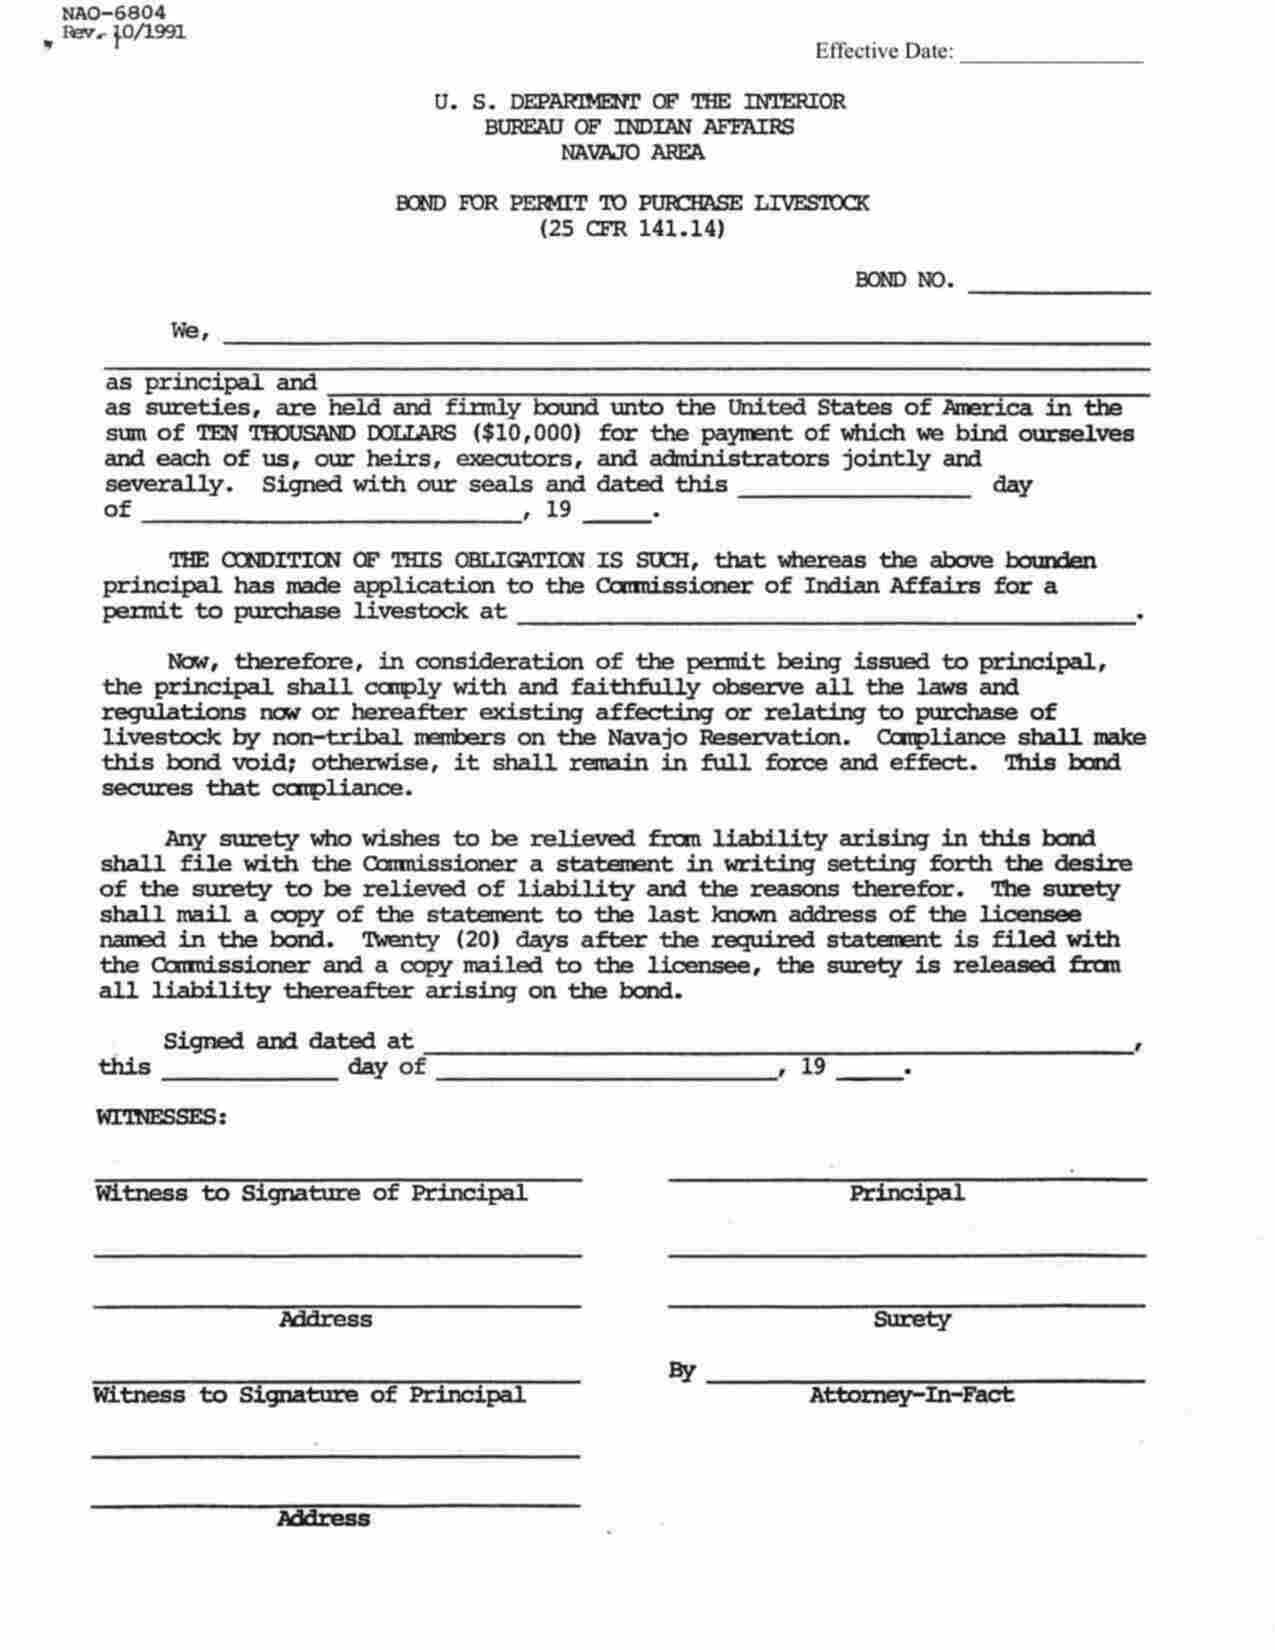 Federal Permit to Purchase Livestock Bond Form